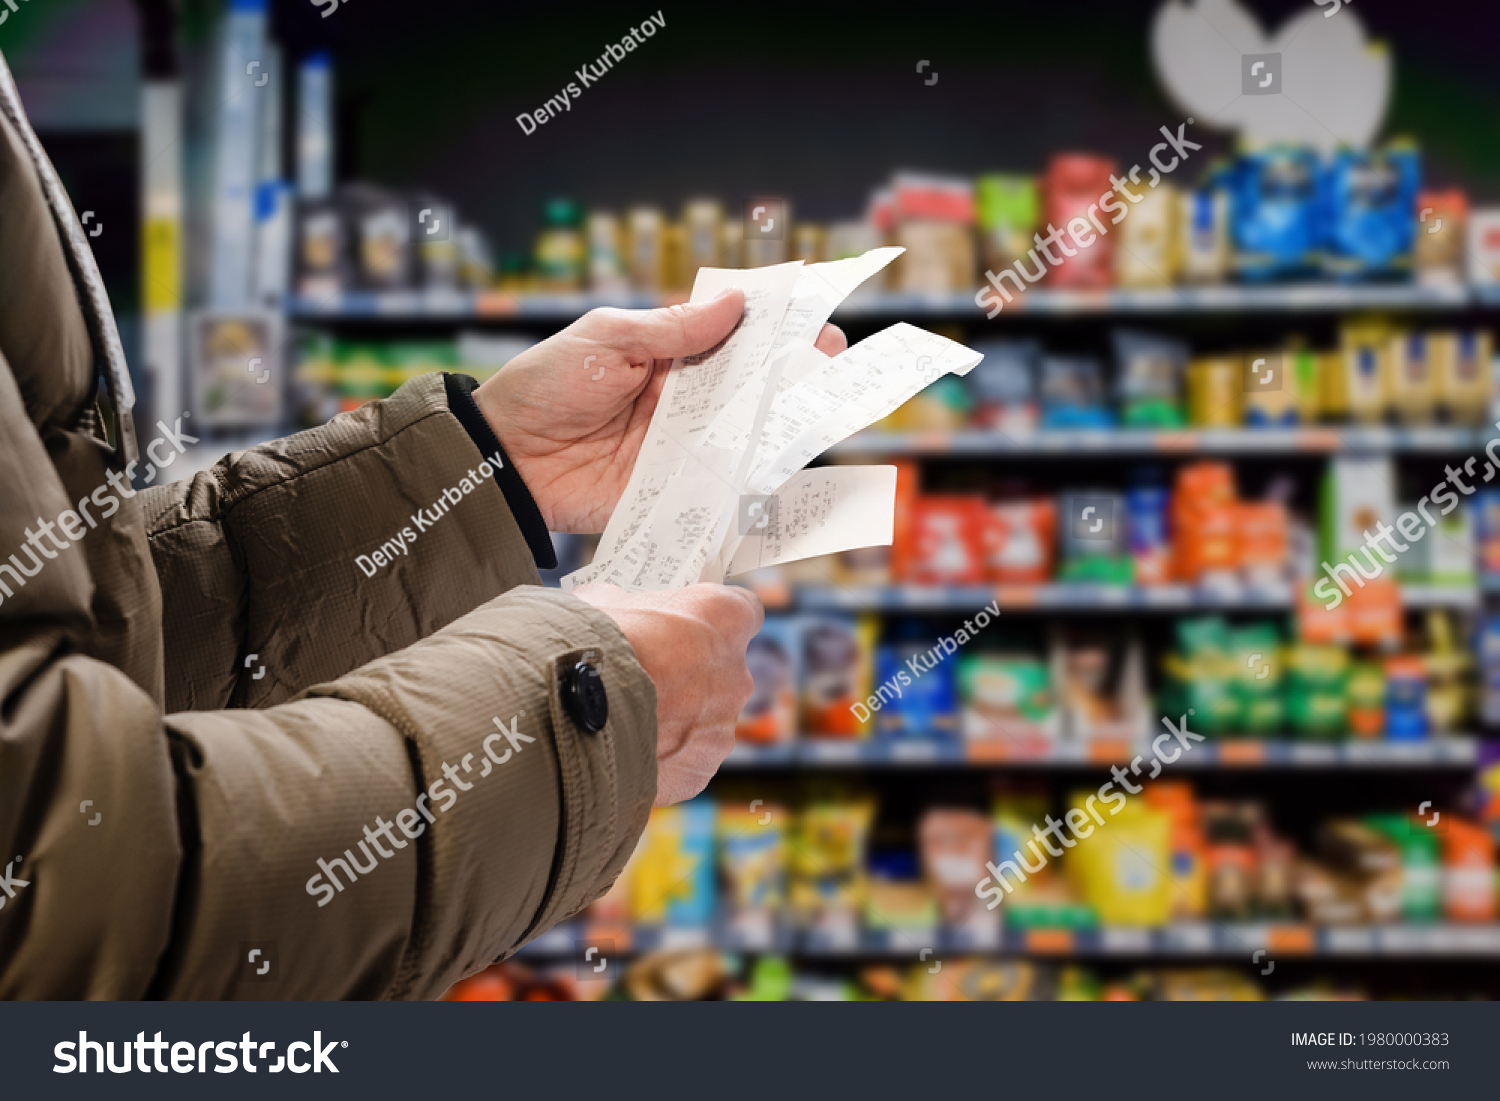 Minded man viewing receipts in supermarket and tracking prices #1980000383